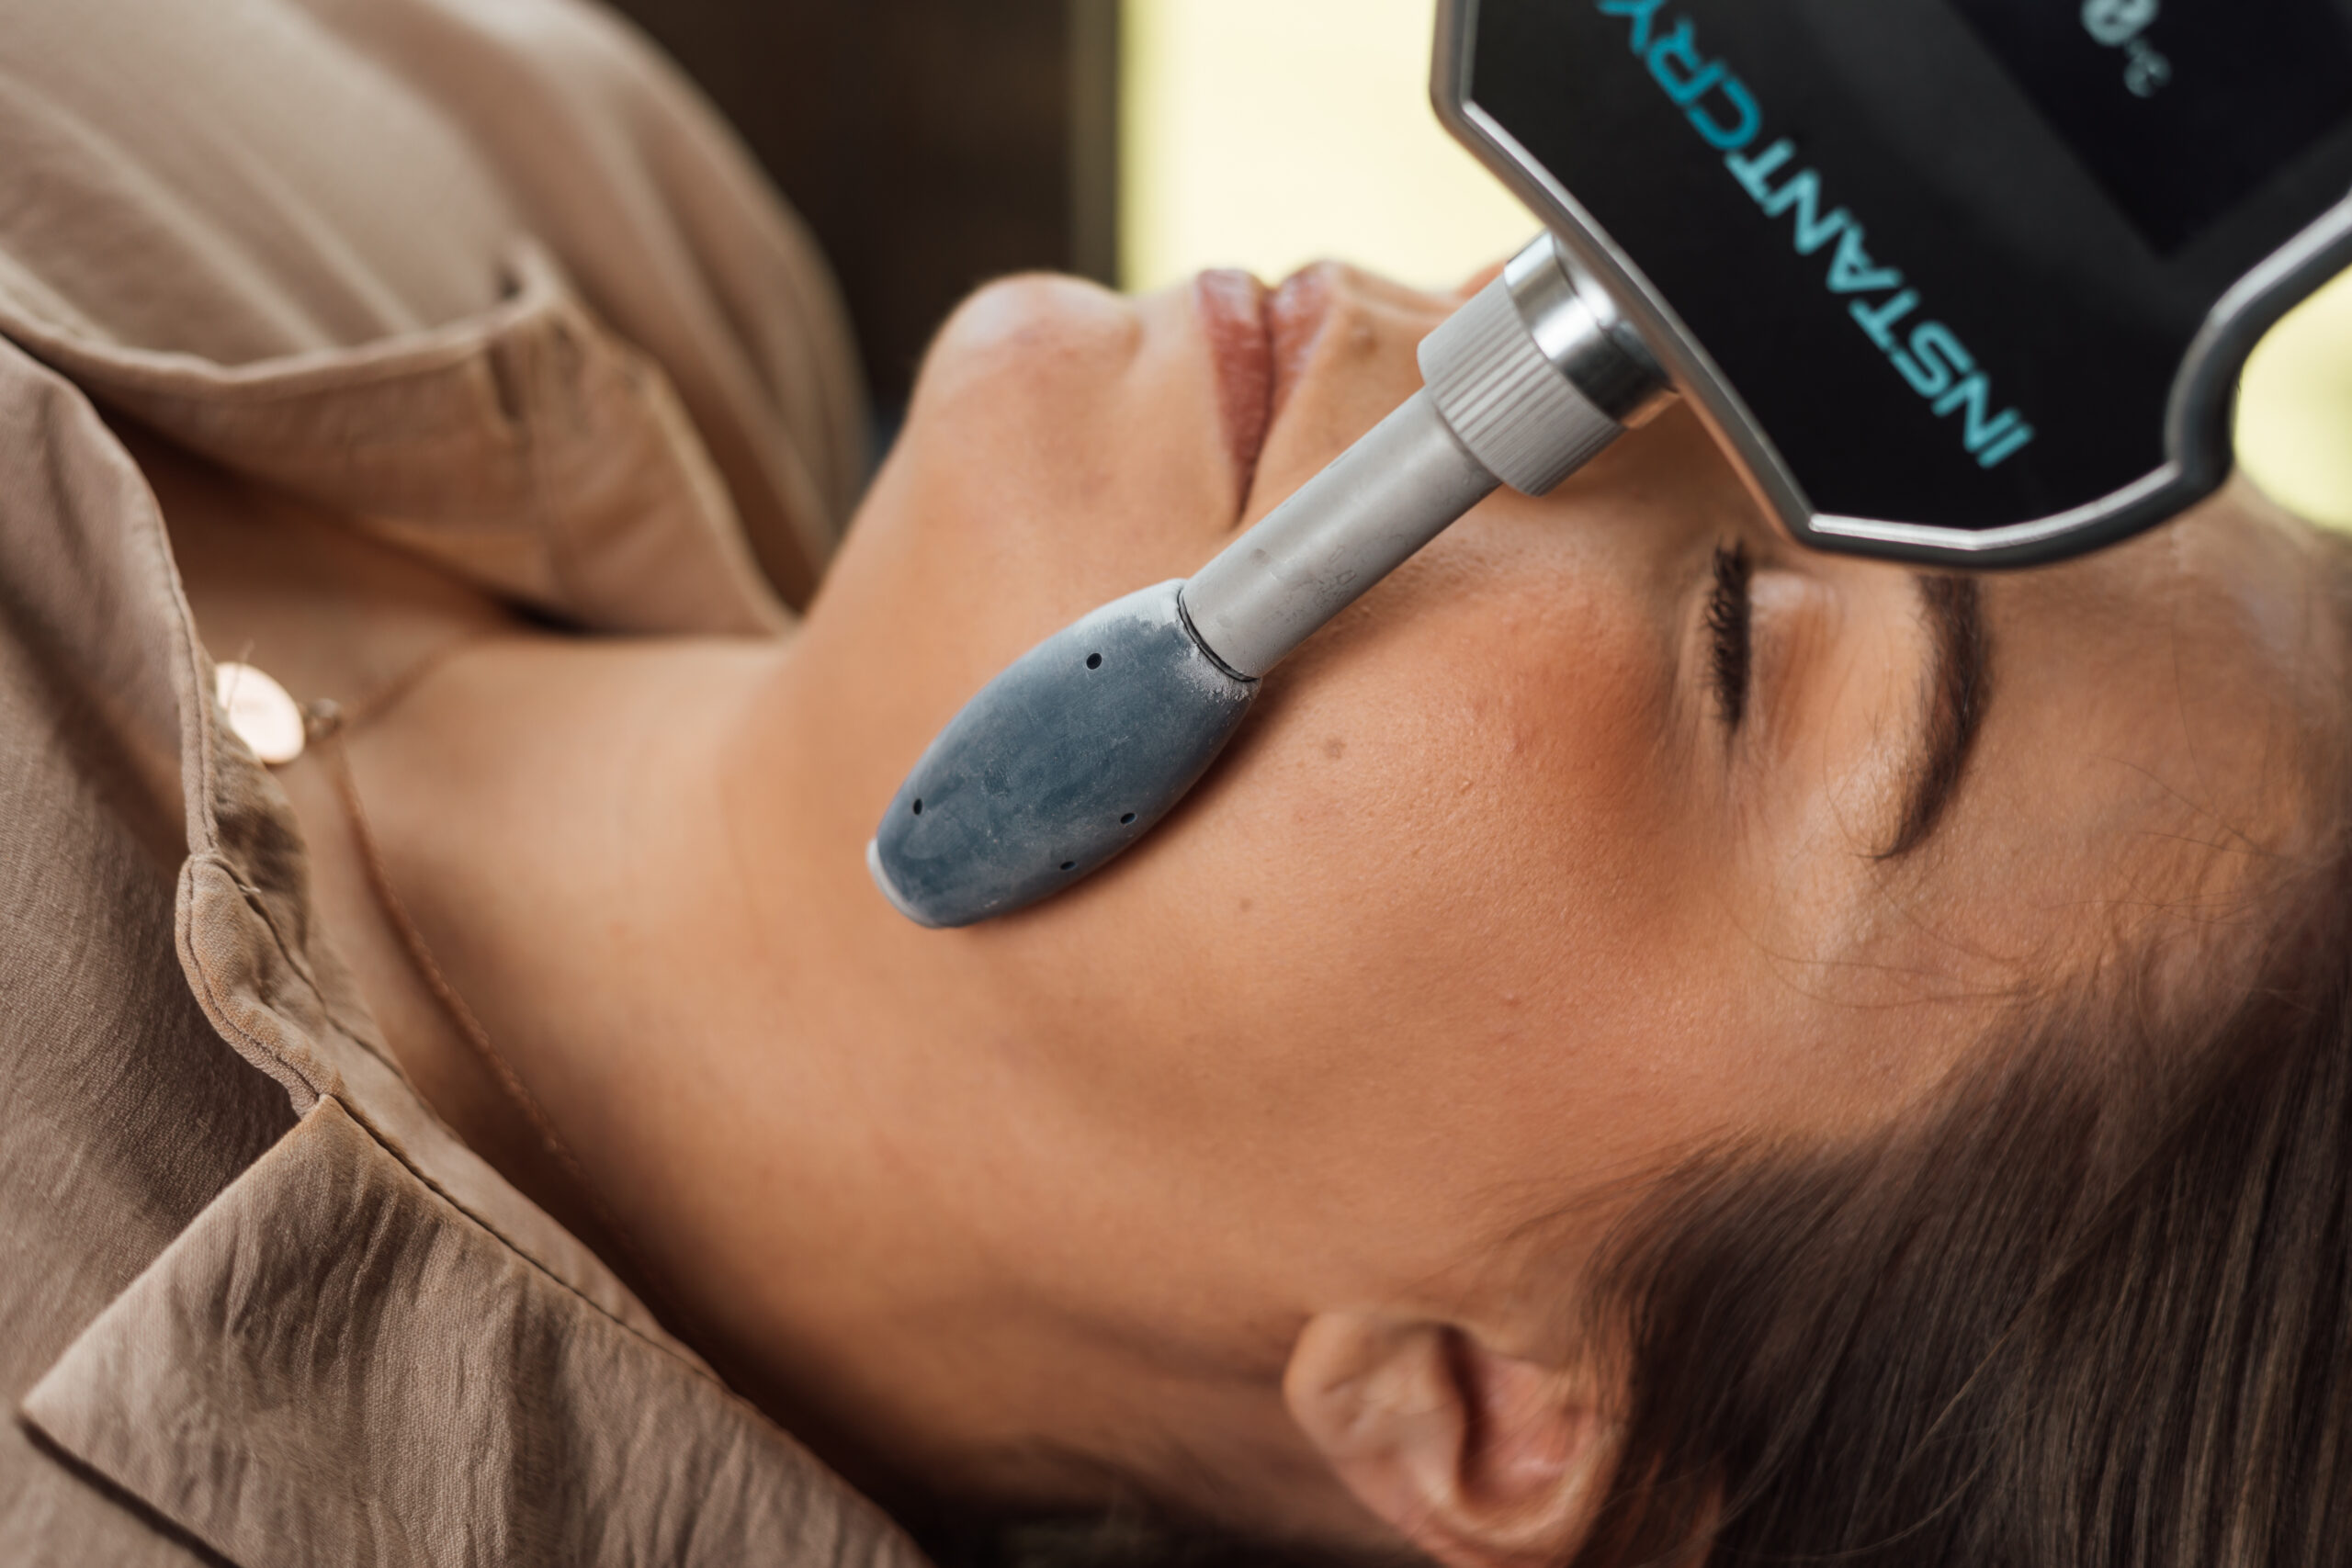 Cryo facial roller being used on a face for a facial